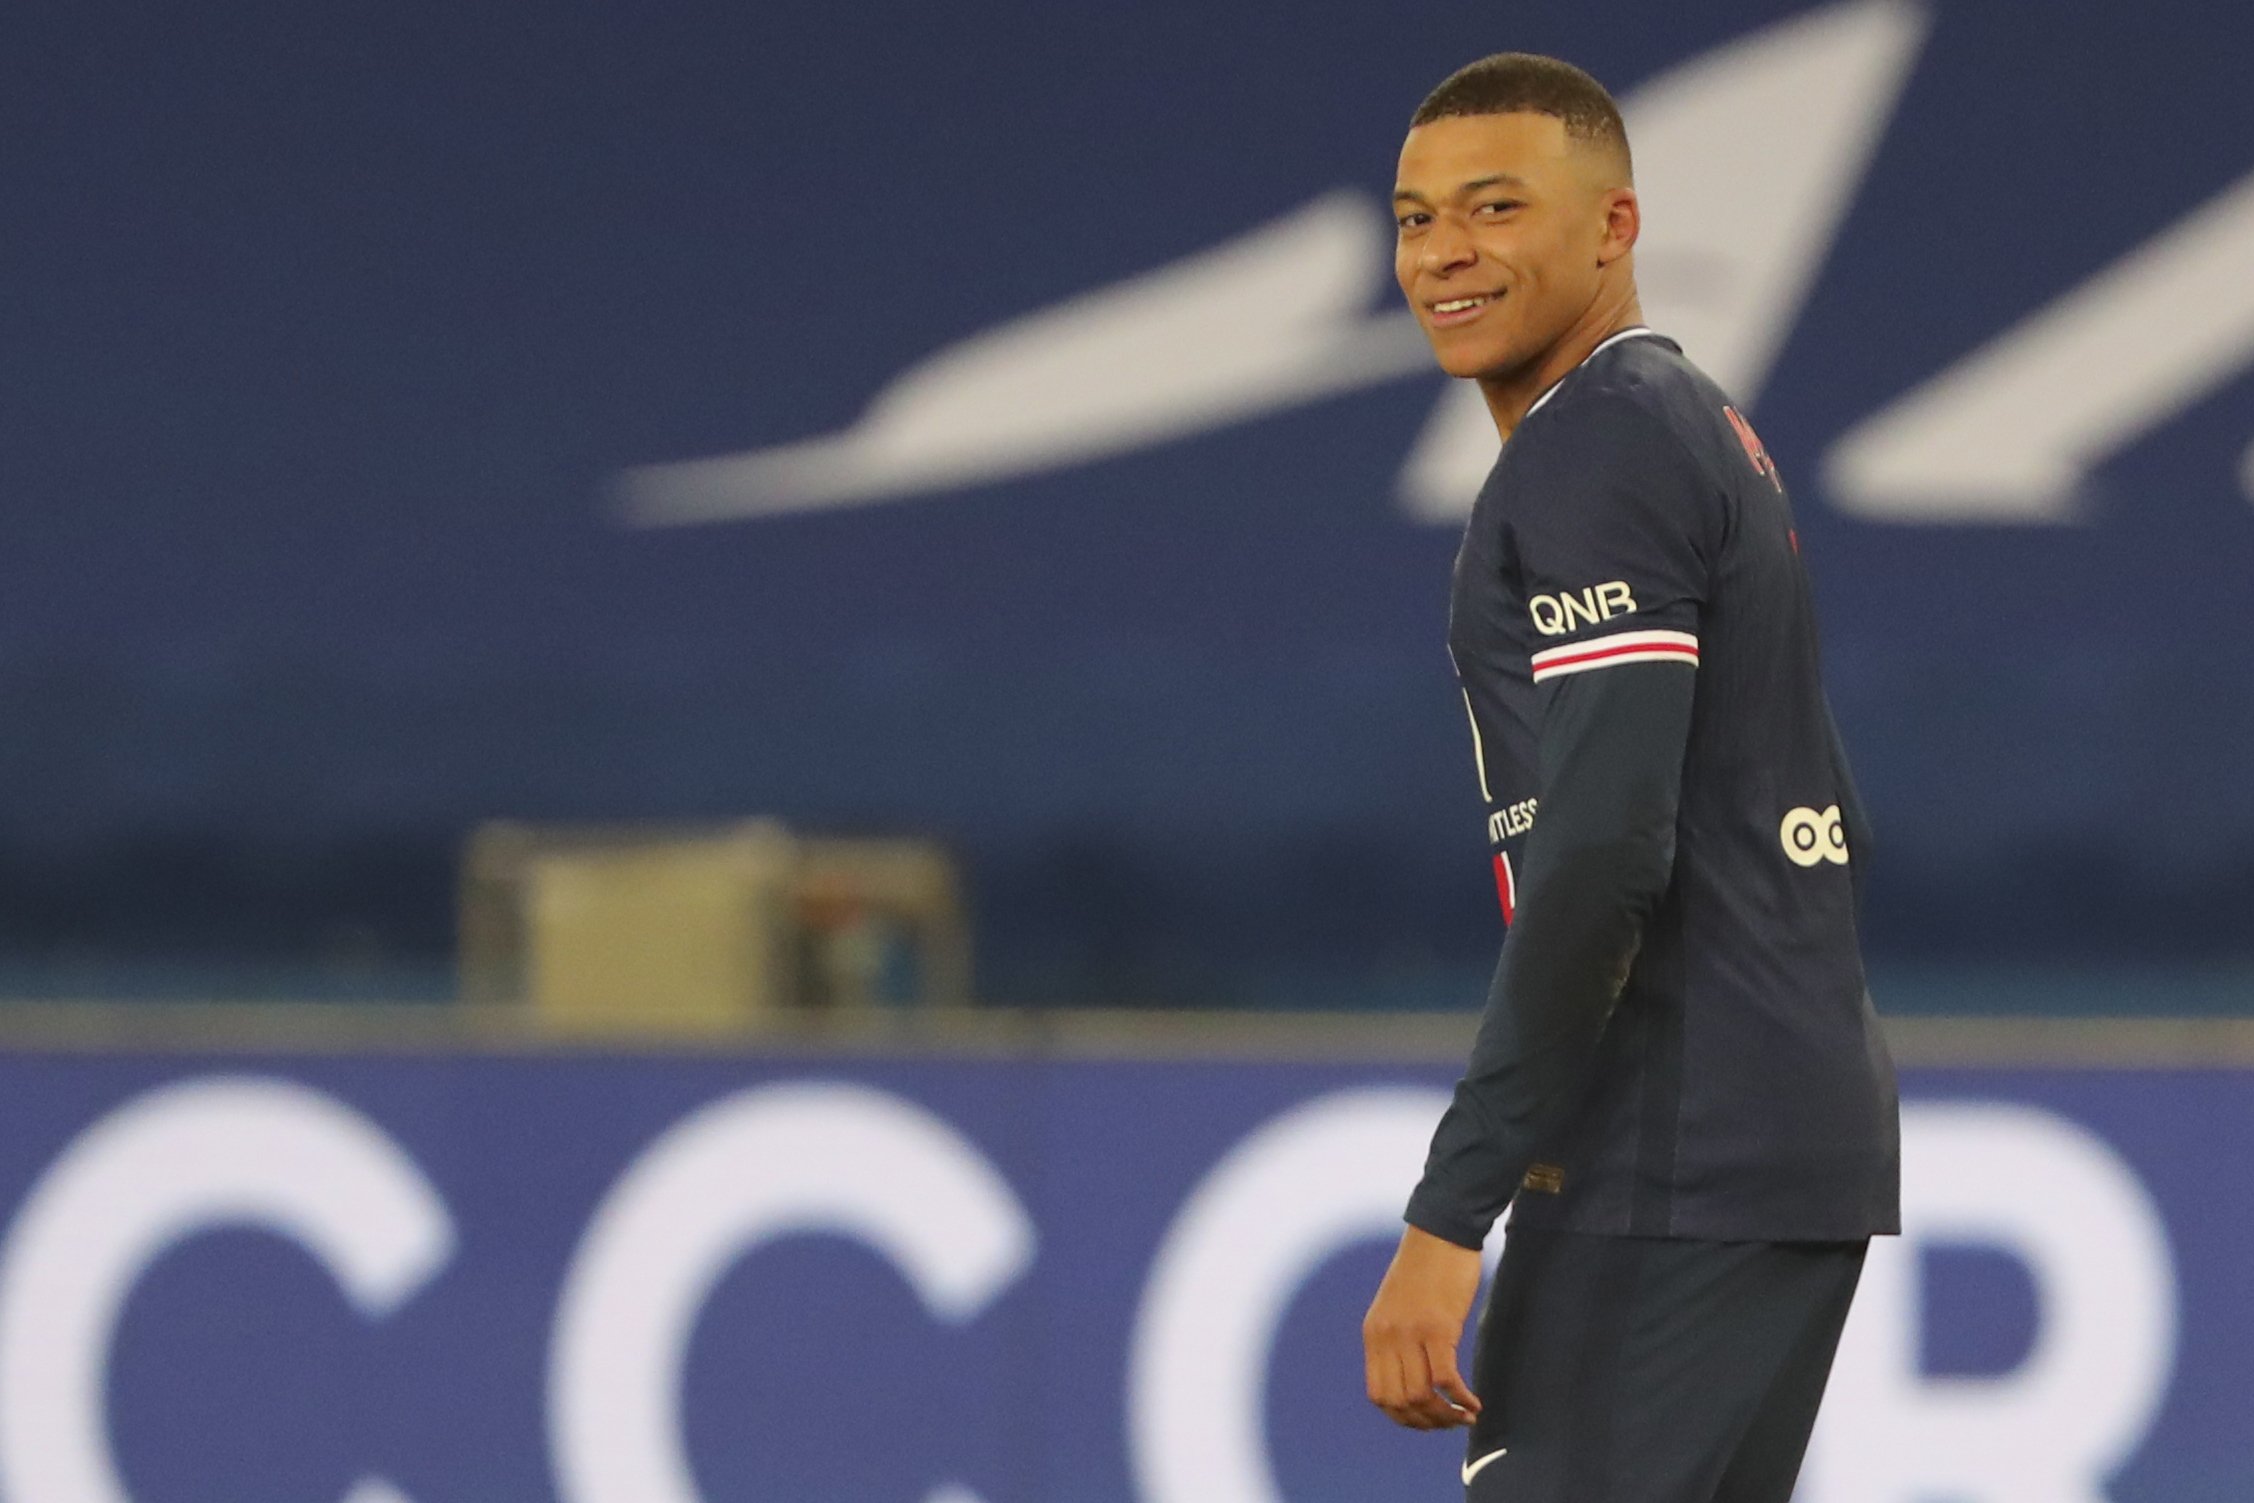 Mbappe's PSG future uncertain as he hesitates over new deal  AP News